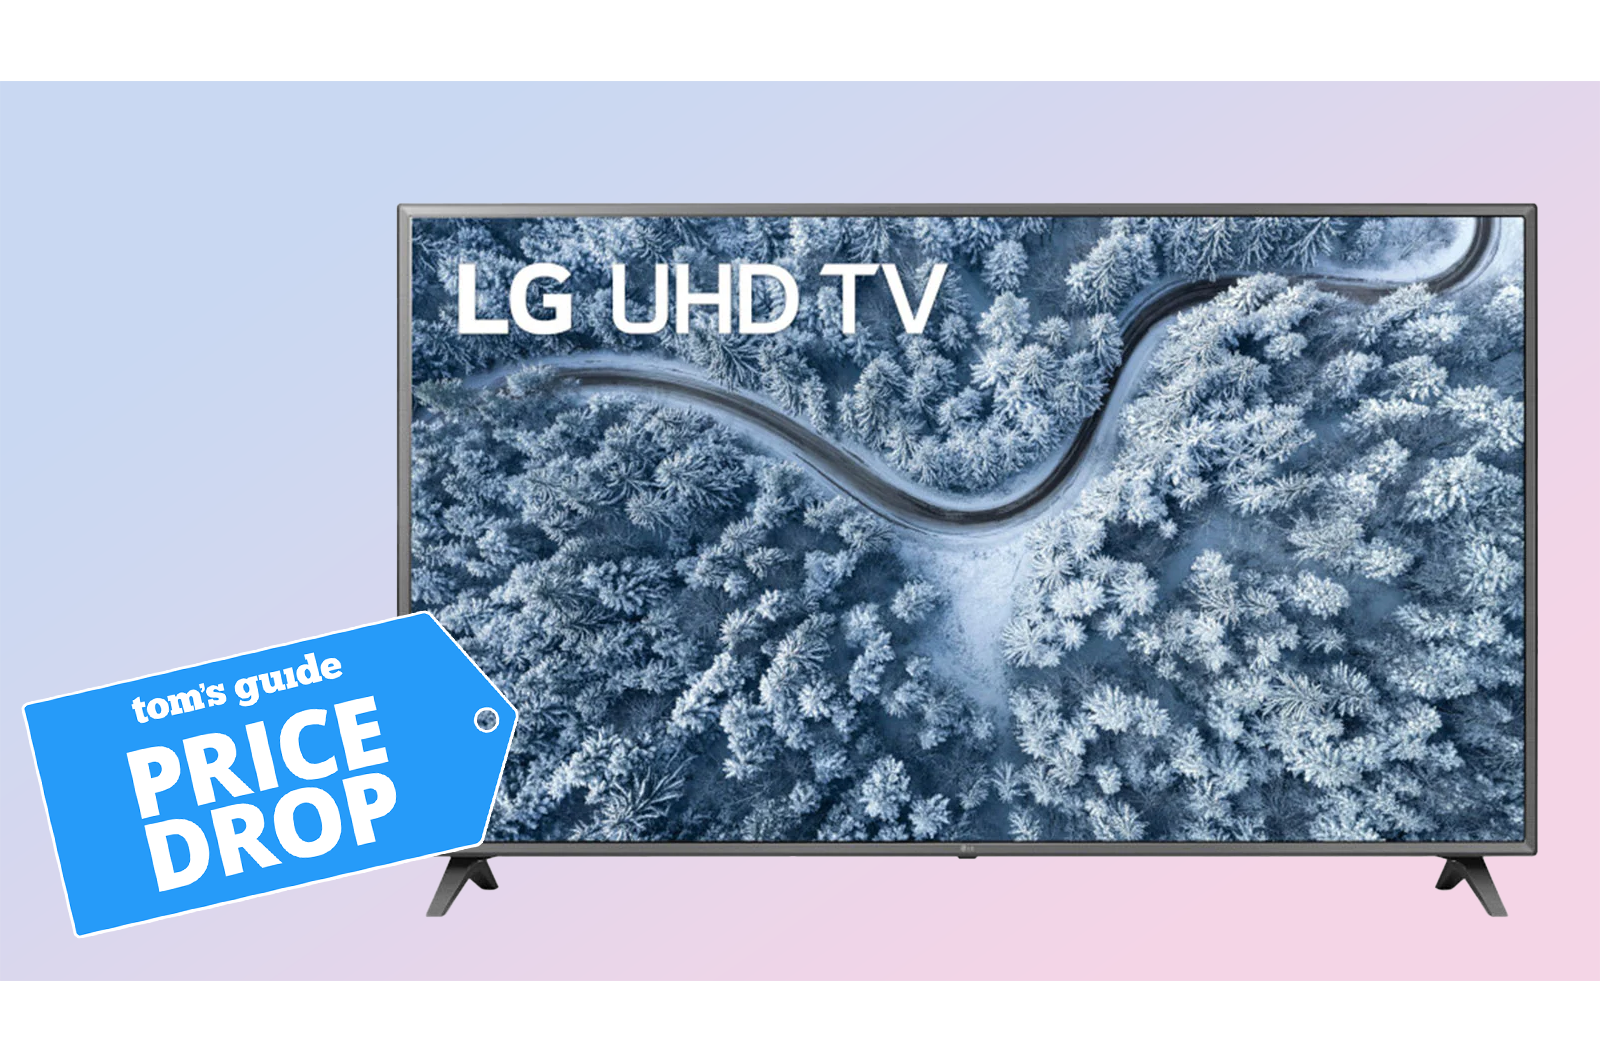 Image of the LG UHD 4K TV on a background with a price drop tag